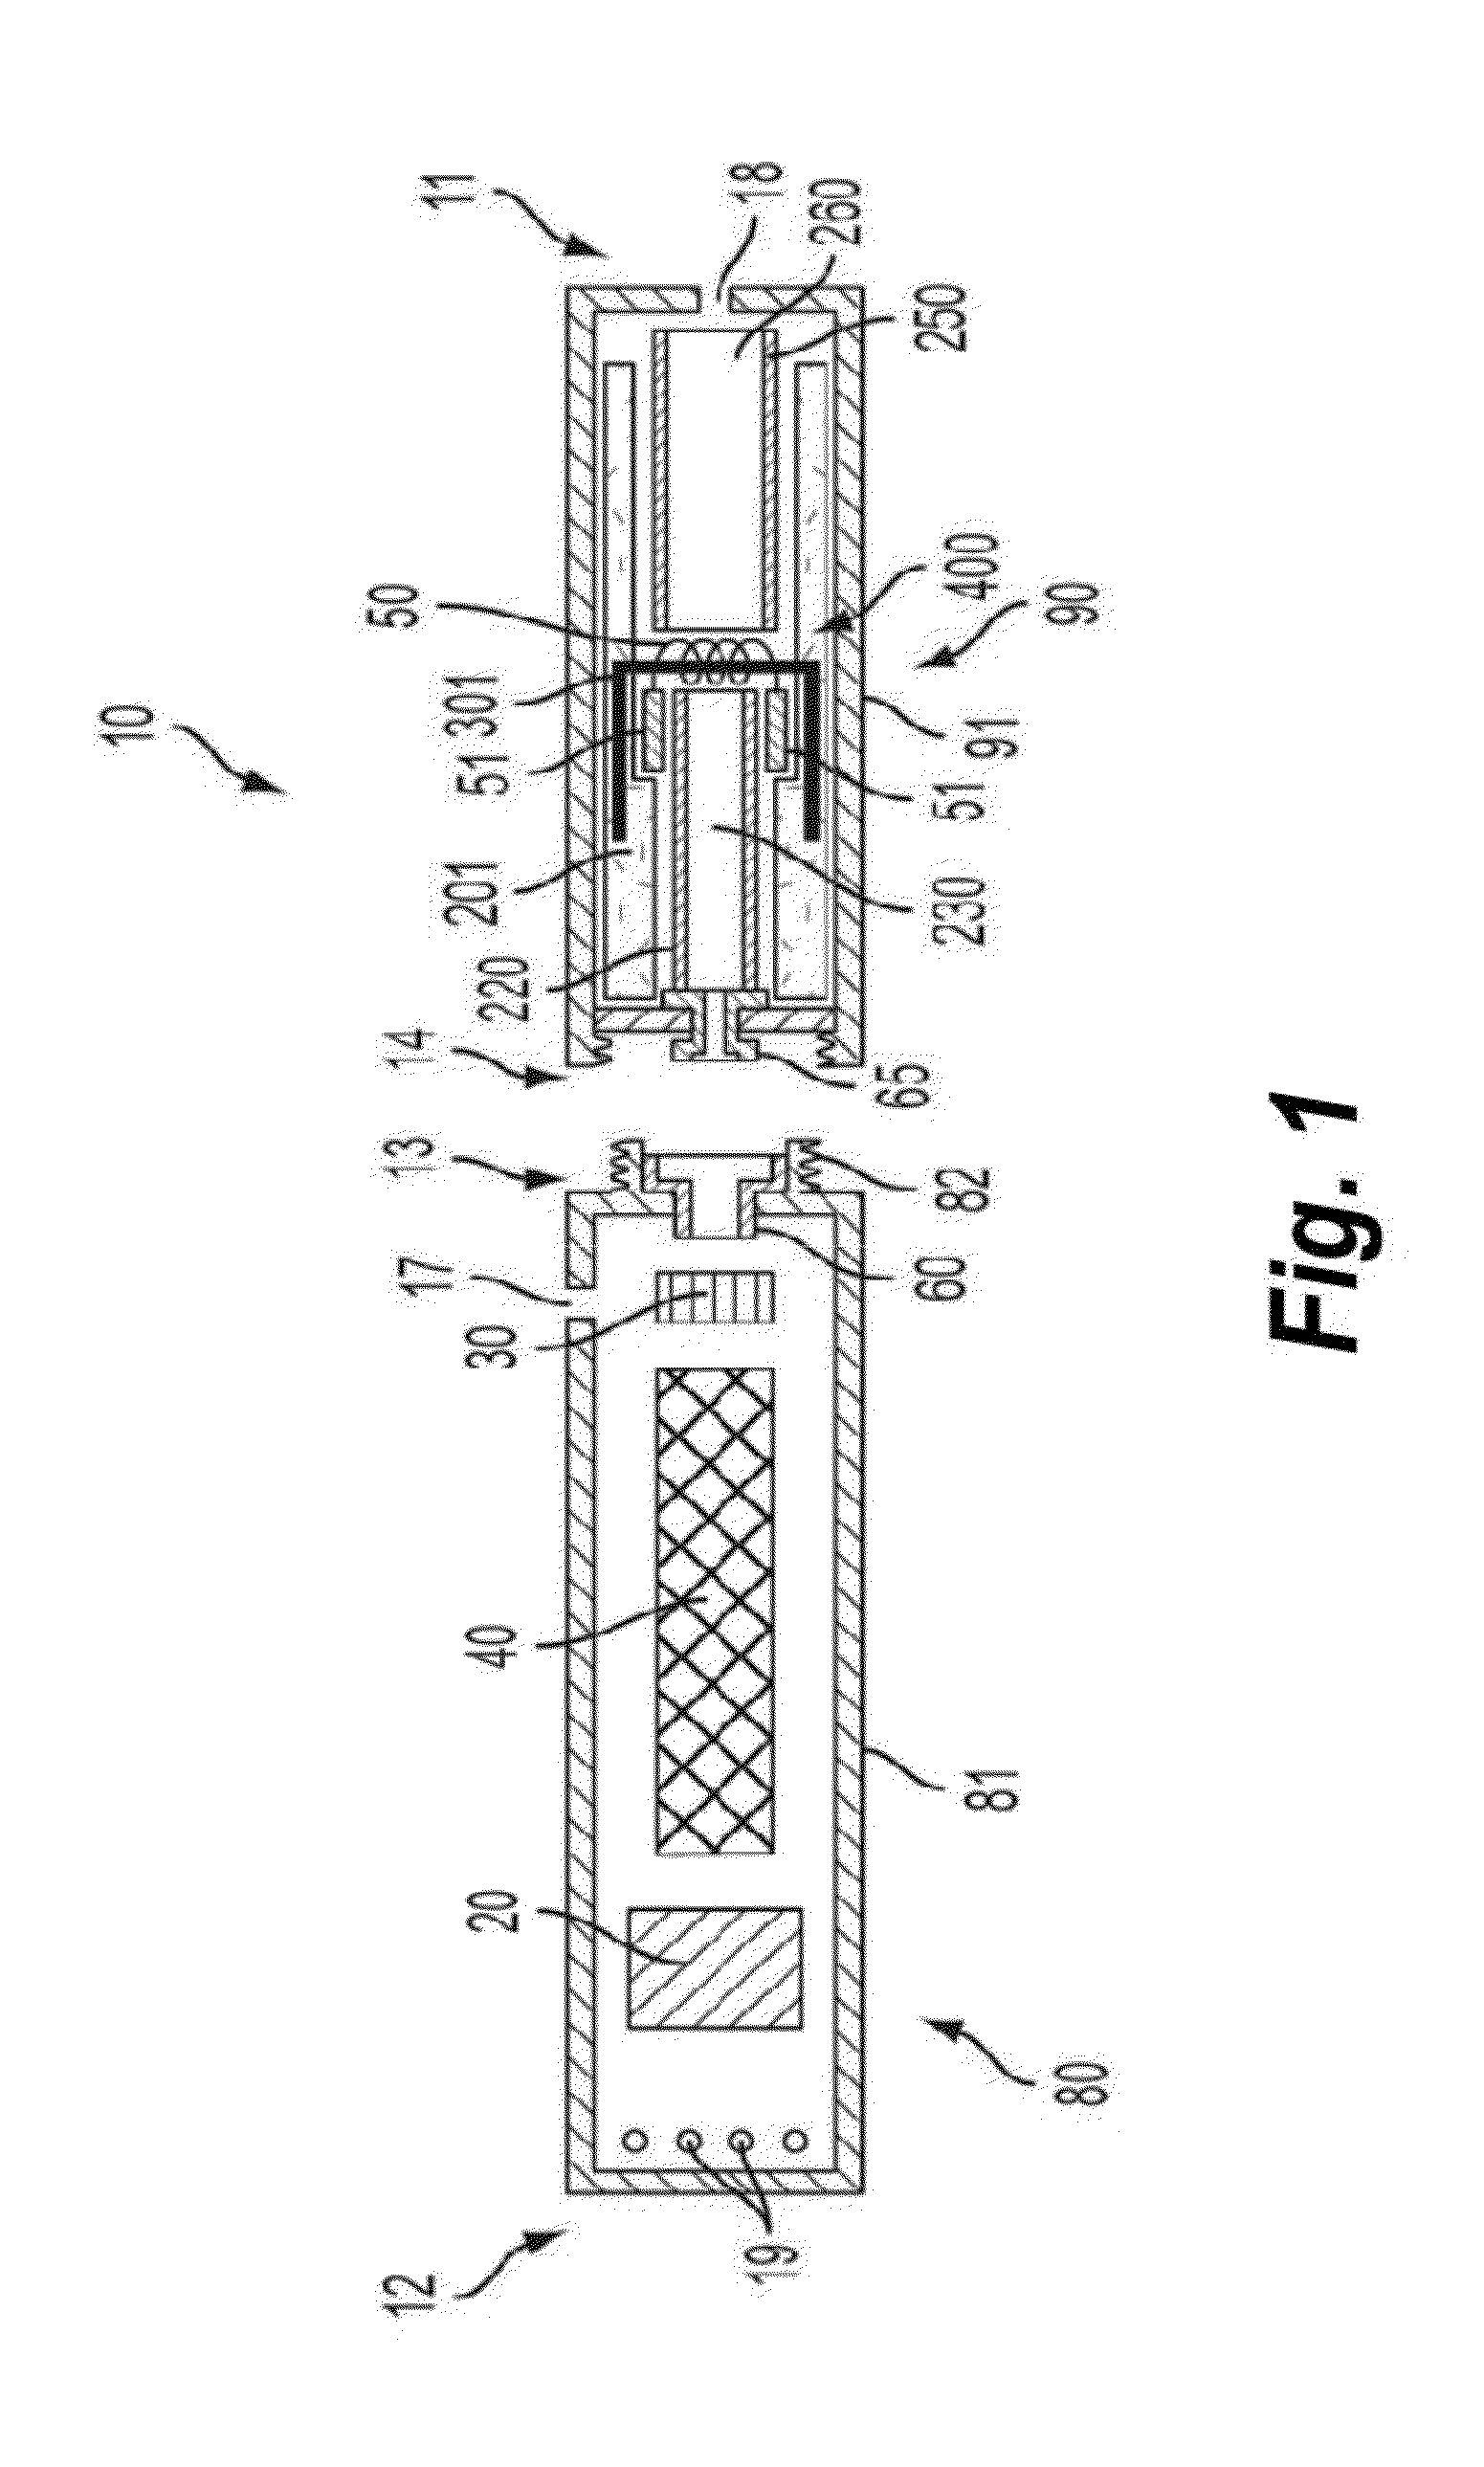 Electronic smoking article with improved storage and transport of aerosol precursor compositions